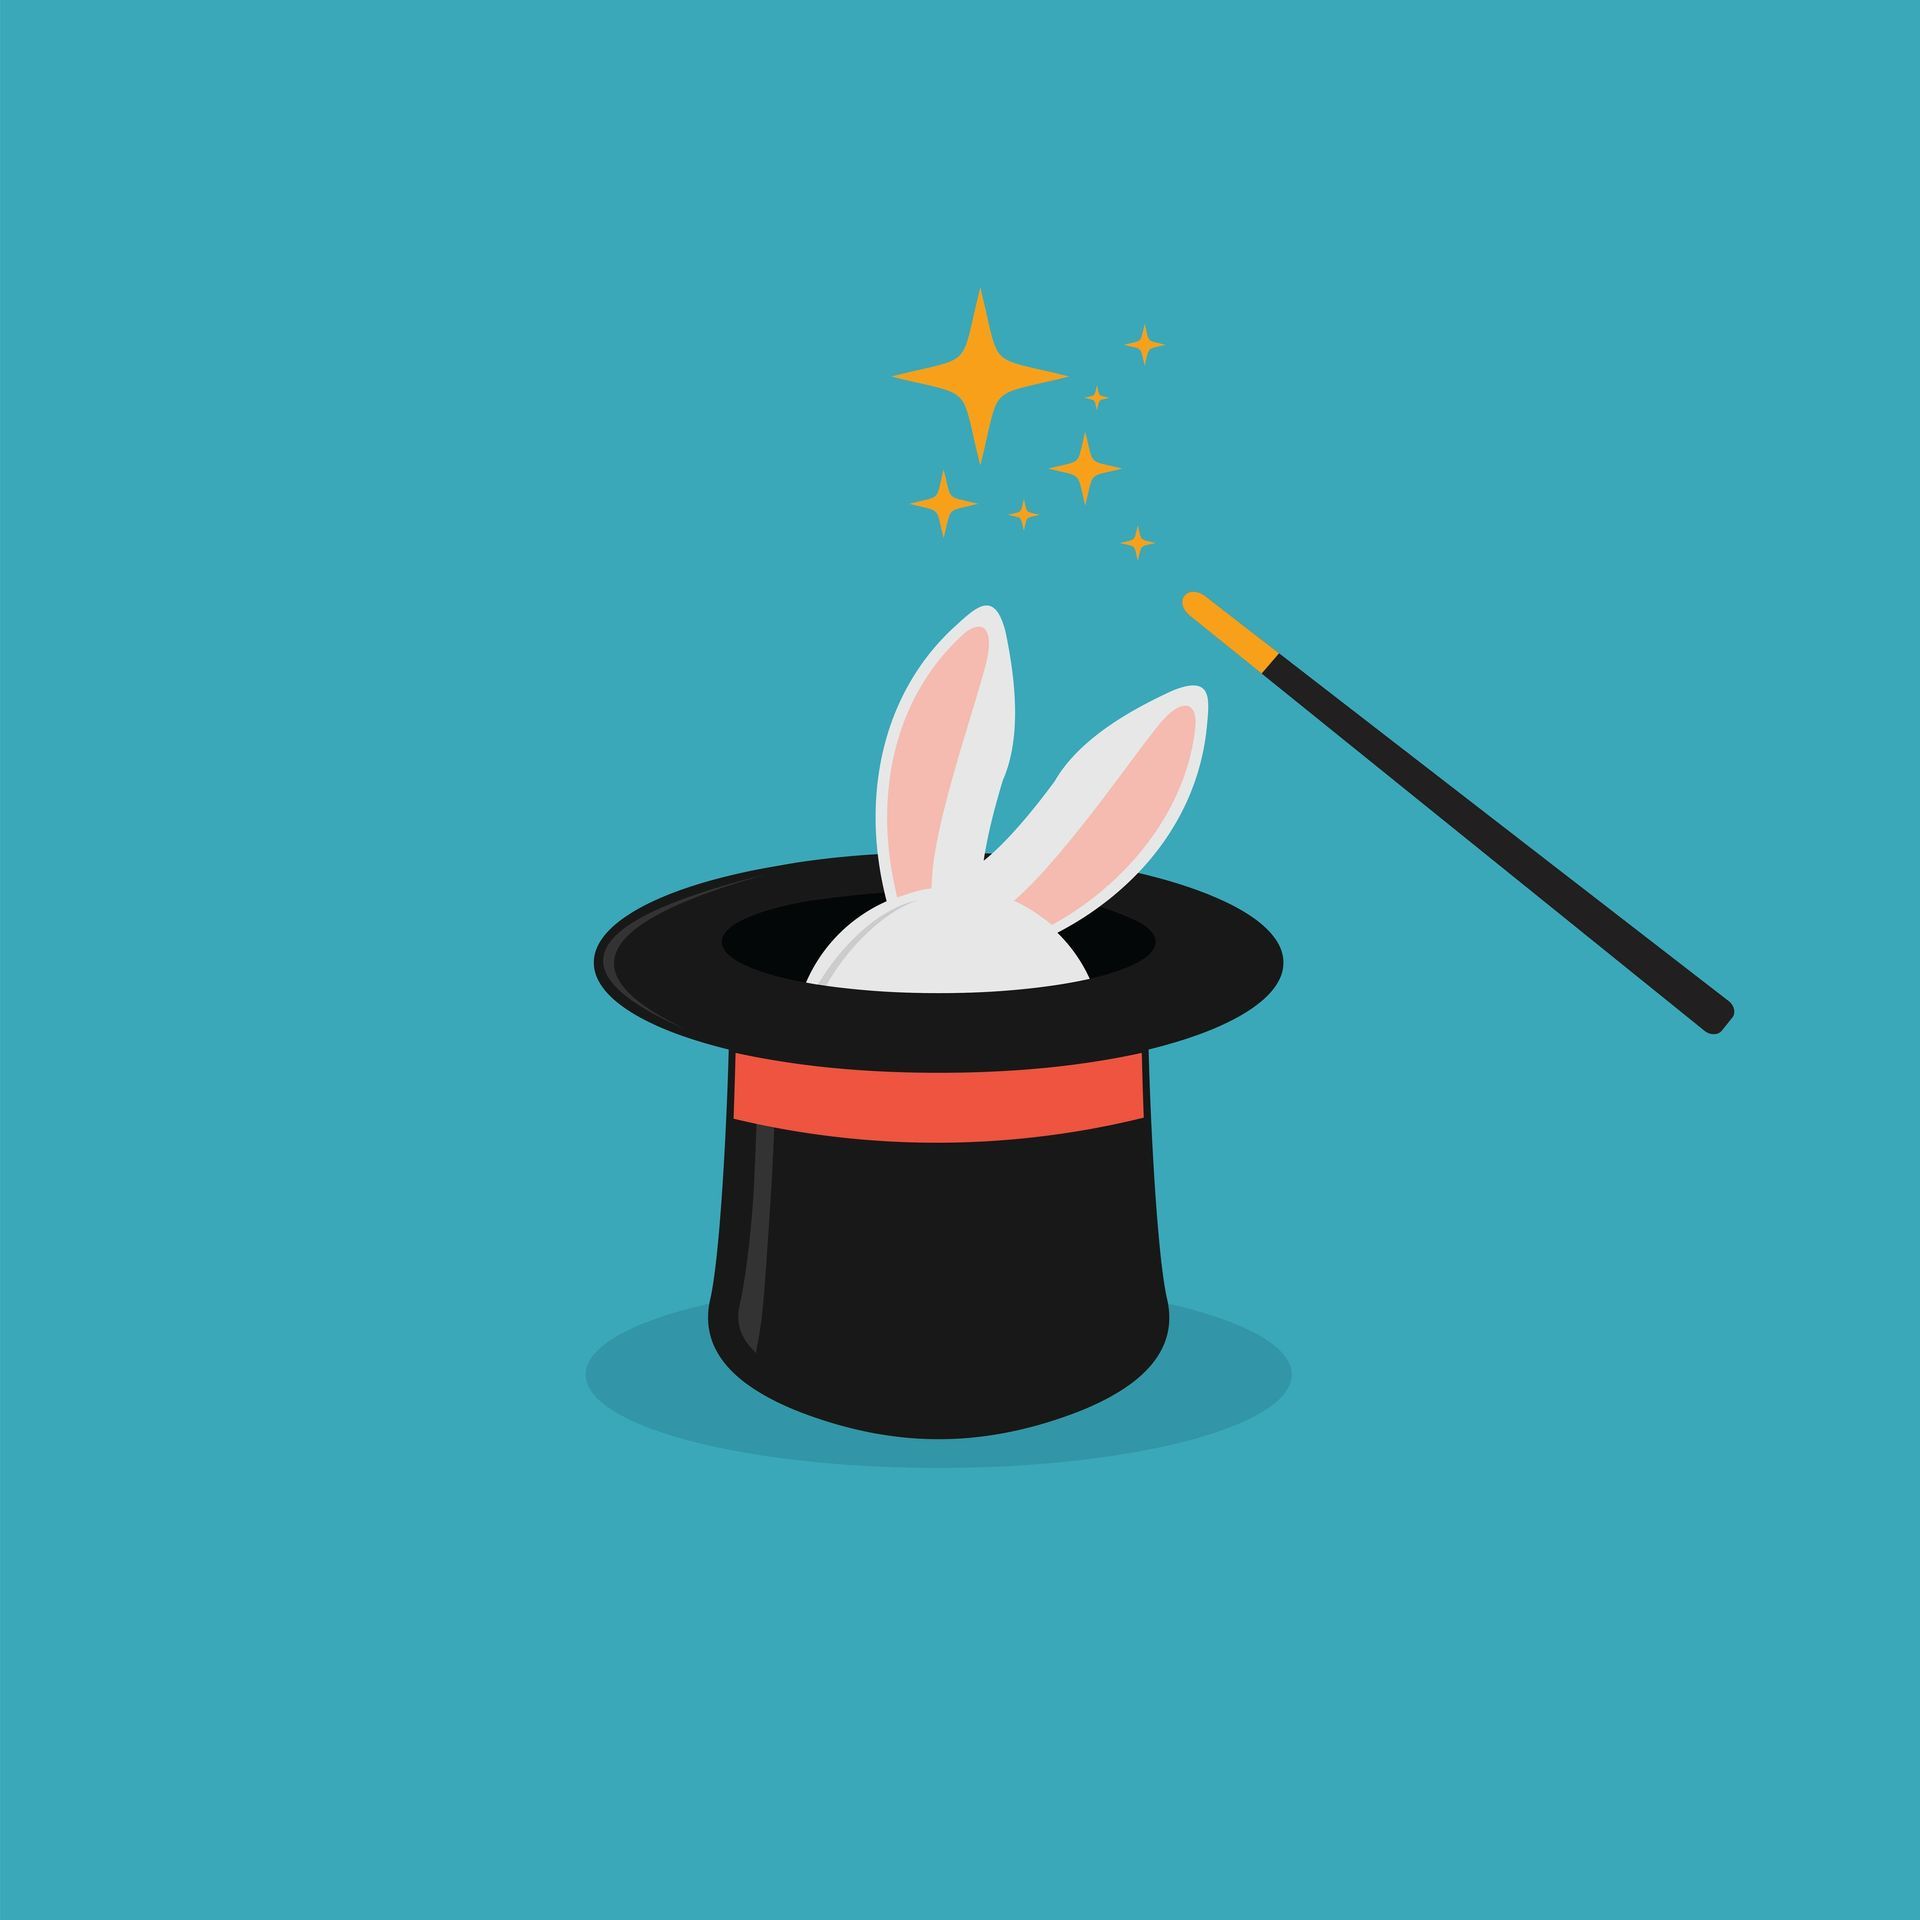 A rabbit is sticking its head out of a top hat with a magic wand.